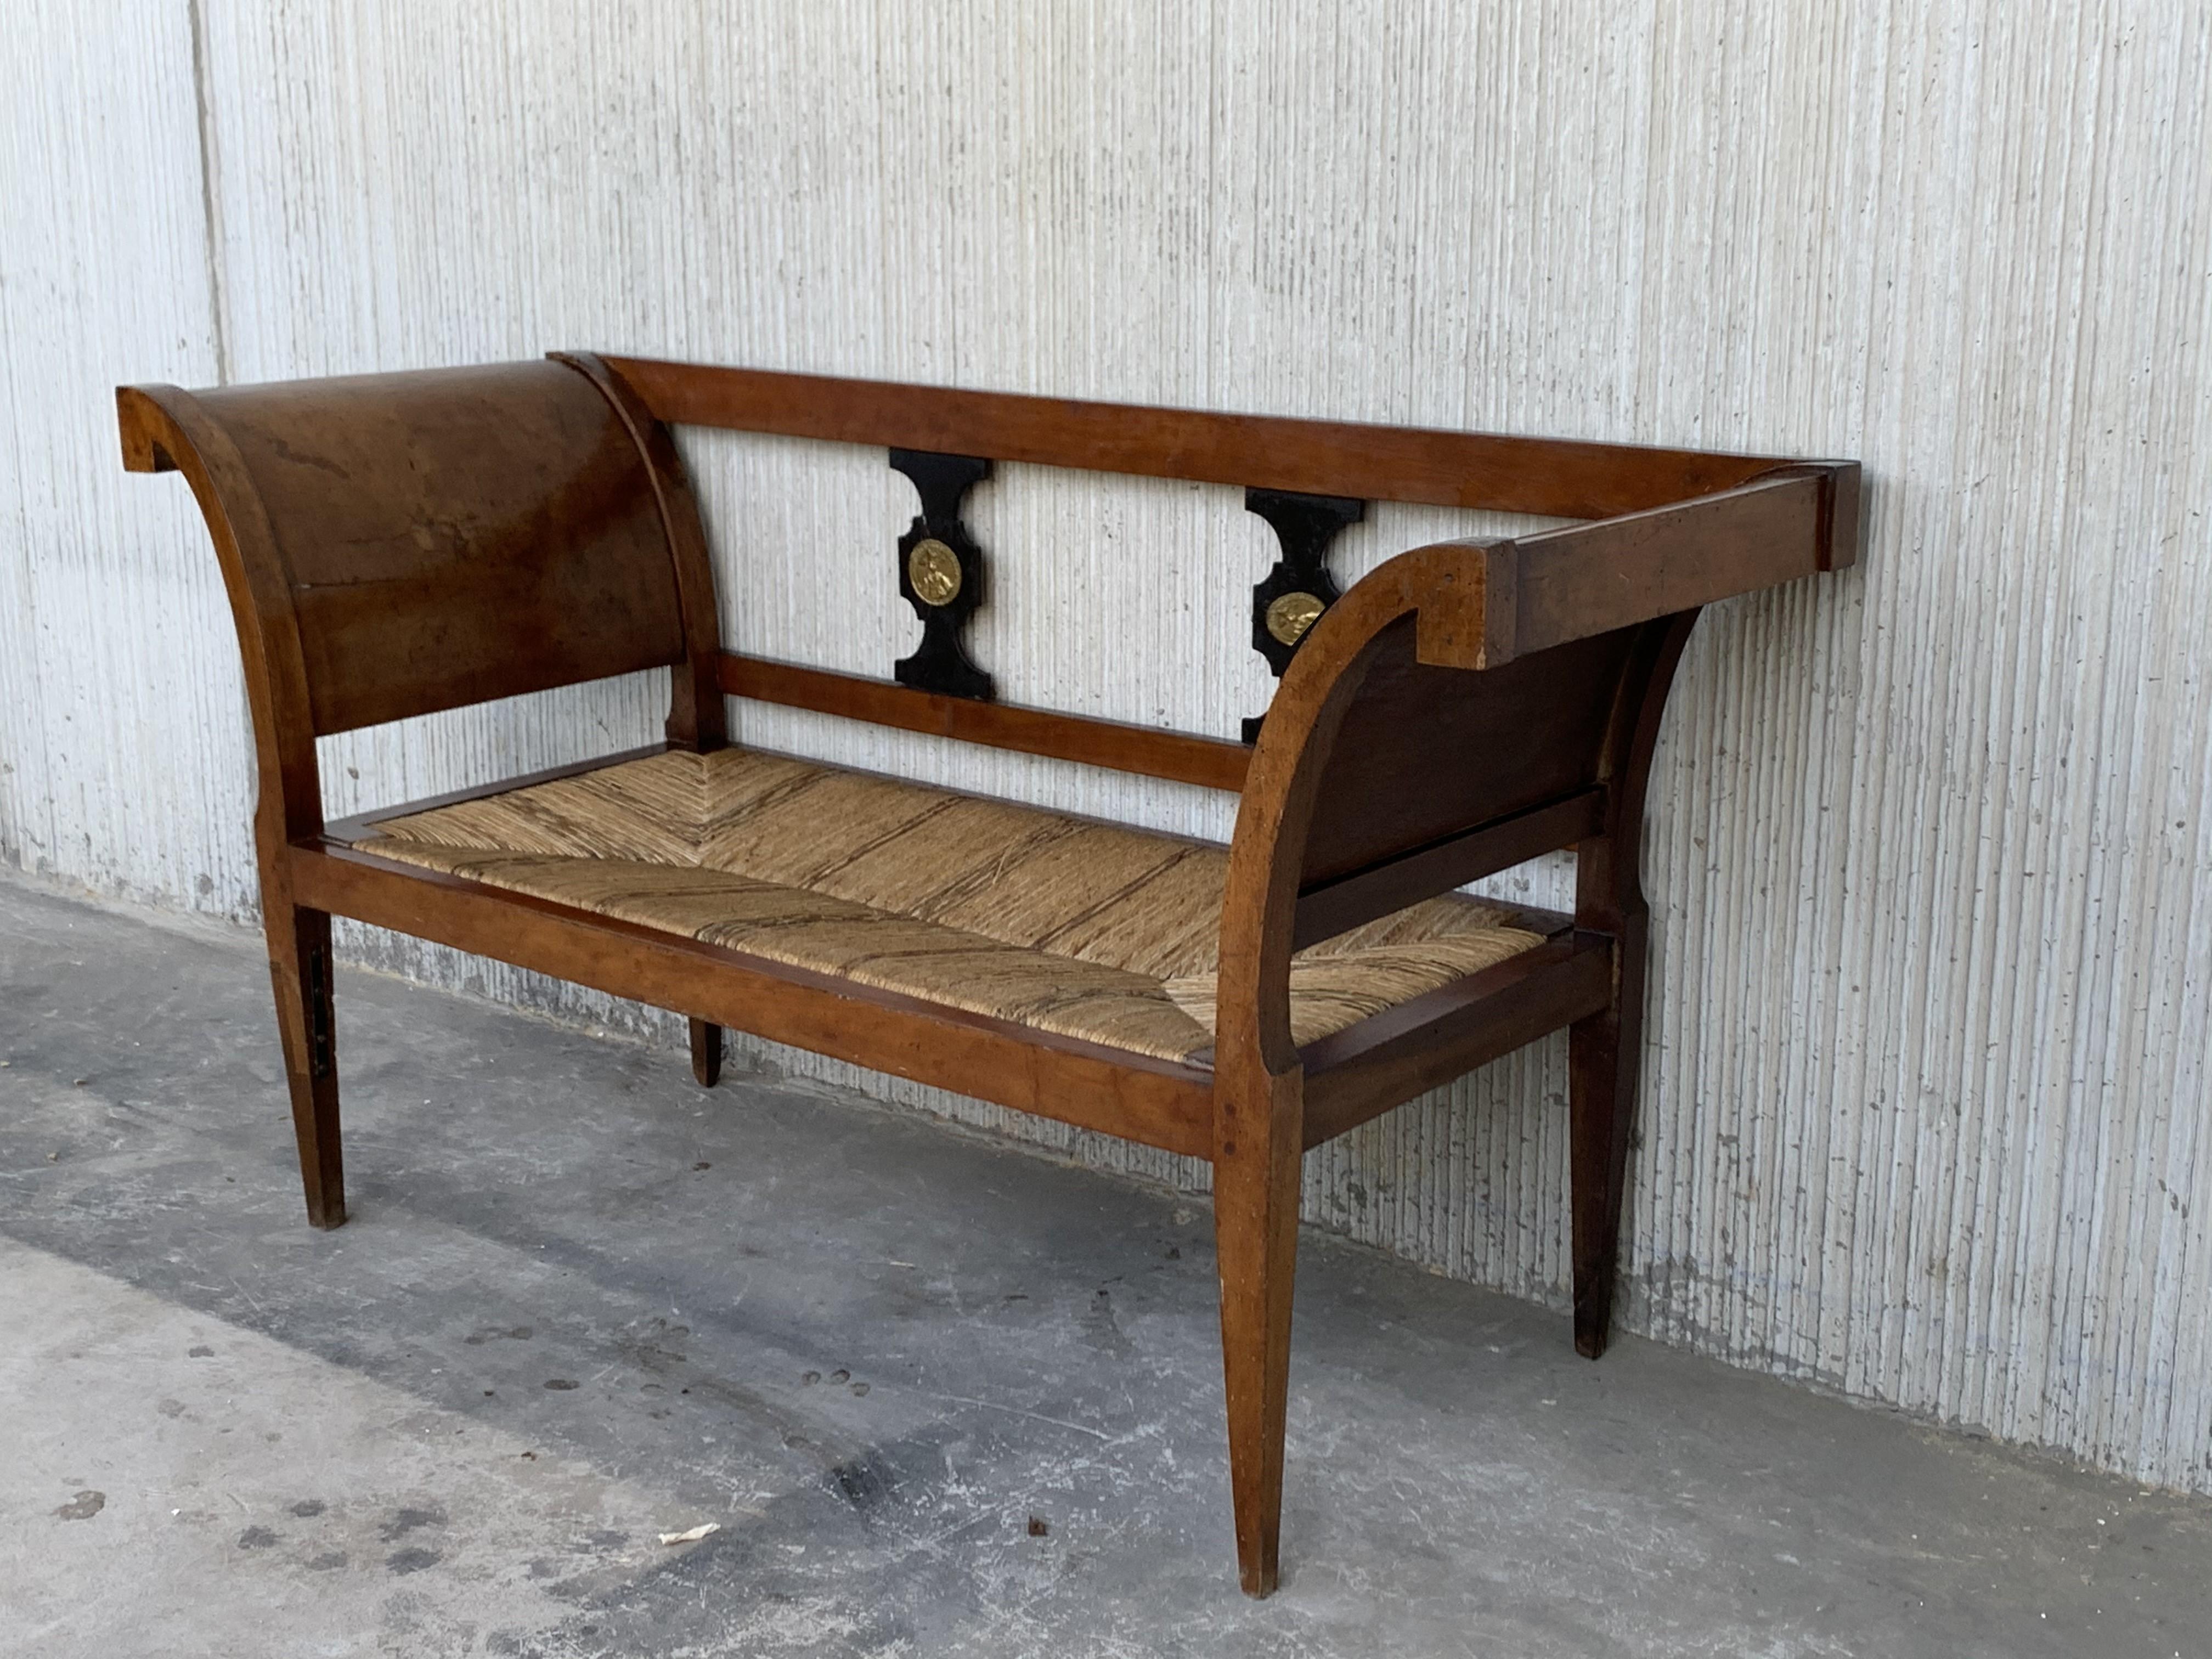 Empire Revival 20th Century Empire Bench in Walnut with Ebonized Details and Caned Seat